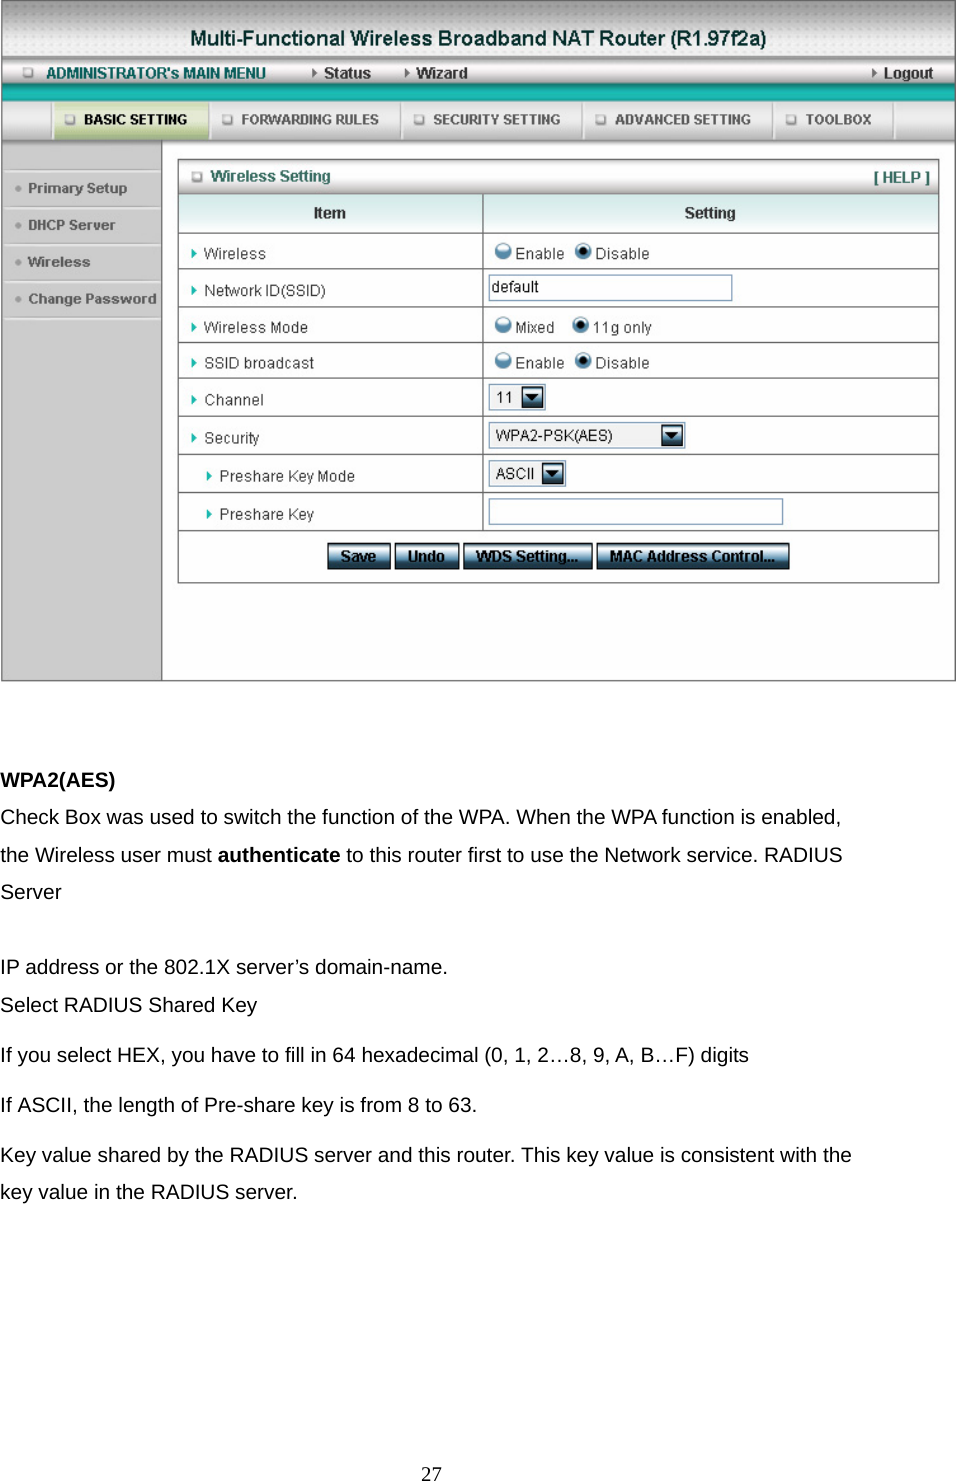   WPA2(AES) Check Box was used to switch the function of the WPA. When the WPA function is enabled, the Wireless user must authenticate to this router first to use the Network service. RADIUS Server  IP address or the 802.1X server’s domain-name.   Select RADIUS Shared Key If you select HEX, you have to fill in 64 hexadecimal (0, 1, 2…8, 9, A, B…F) digits If ASCII, the length of Pre-share key is from 8 to 63. Key value shared by the RADIUS server and this router. This key value is consistent with the key value in the RADIUS server.  27